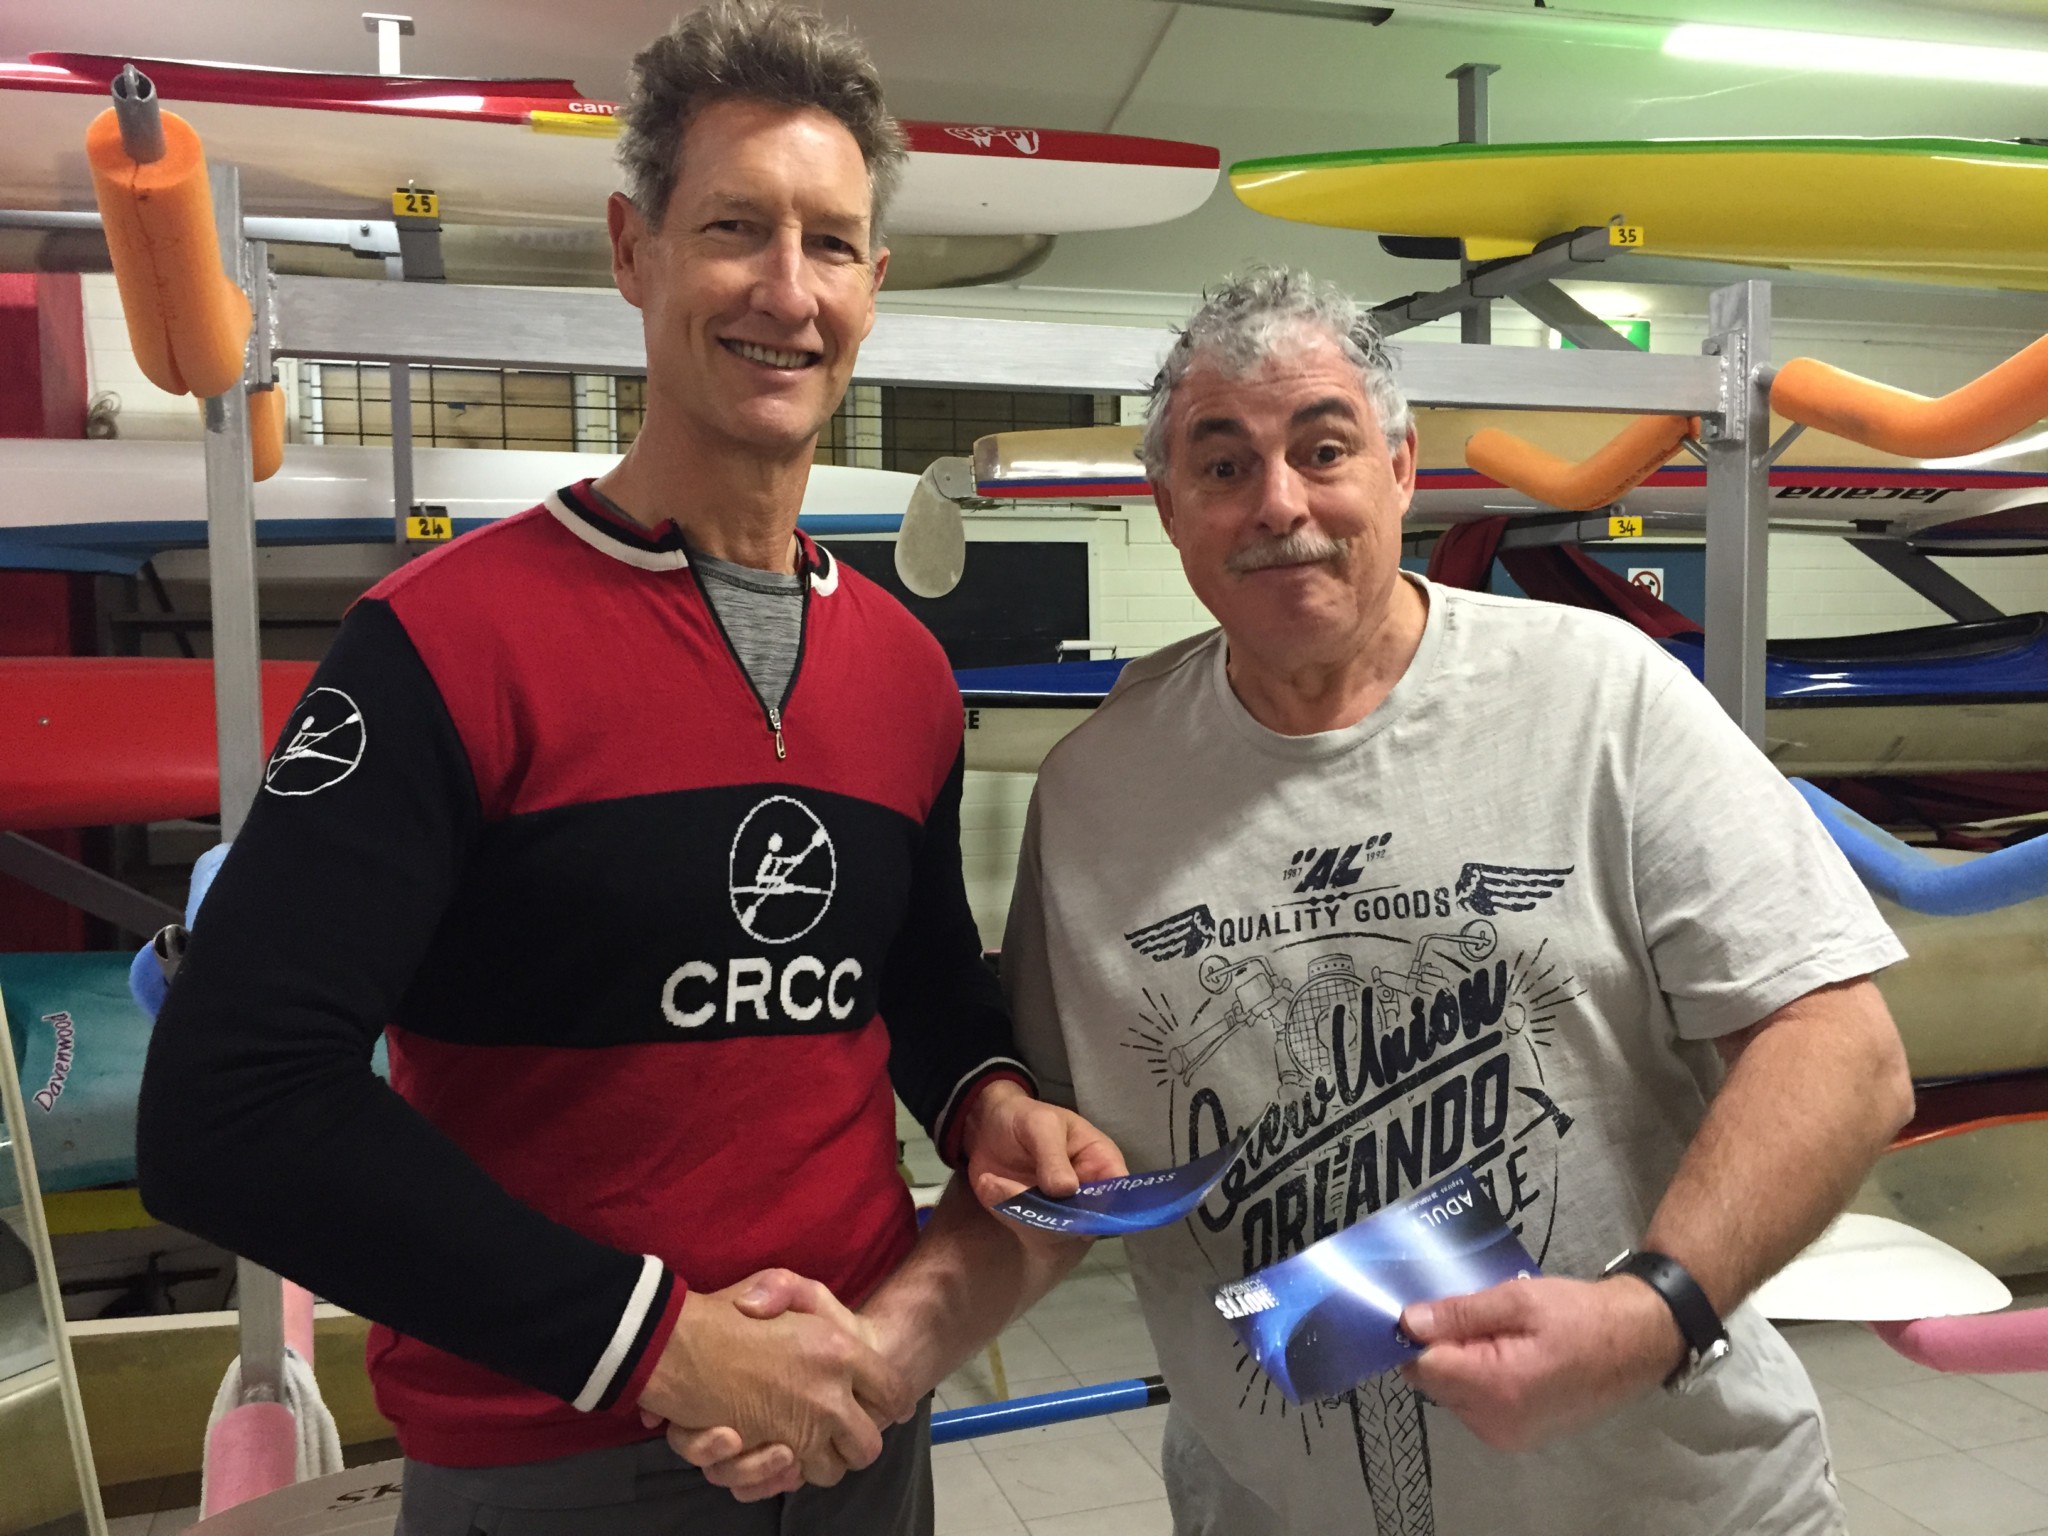 Tues 25th October 2016 : Tonights photo shows Jeff and last weeks winner Louis Botes accepting movie vouchers.